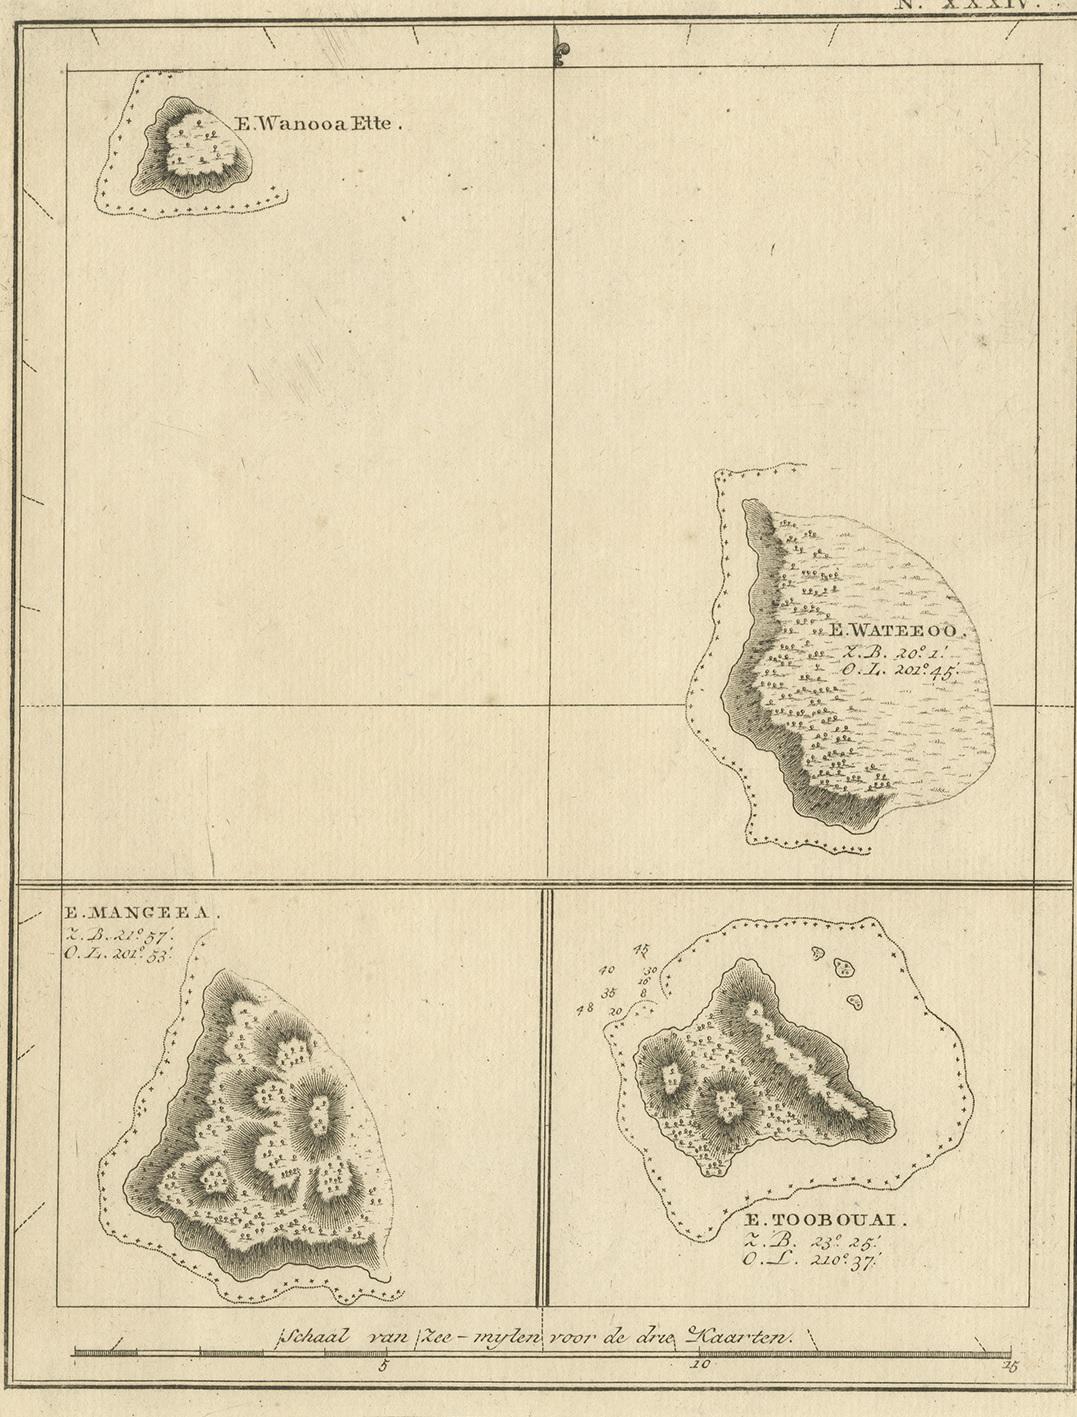 Dutch Antique Map of South Pacific Islands by J. Cook, 1803